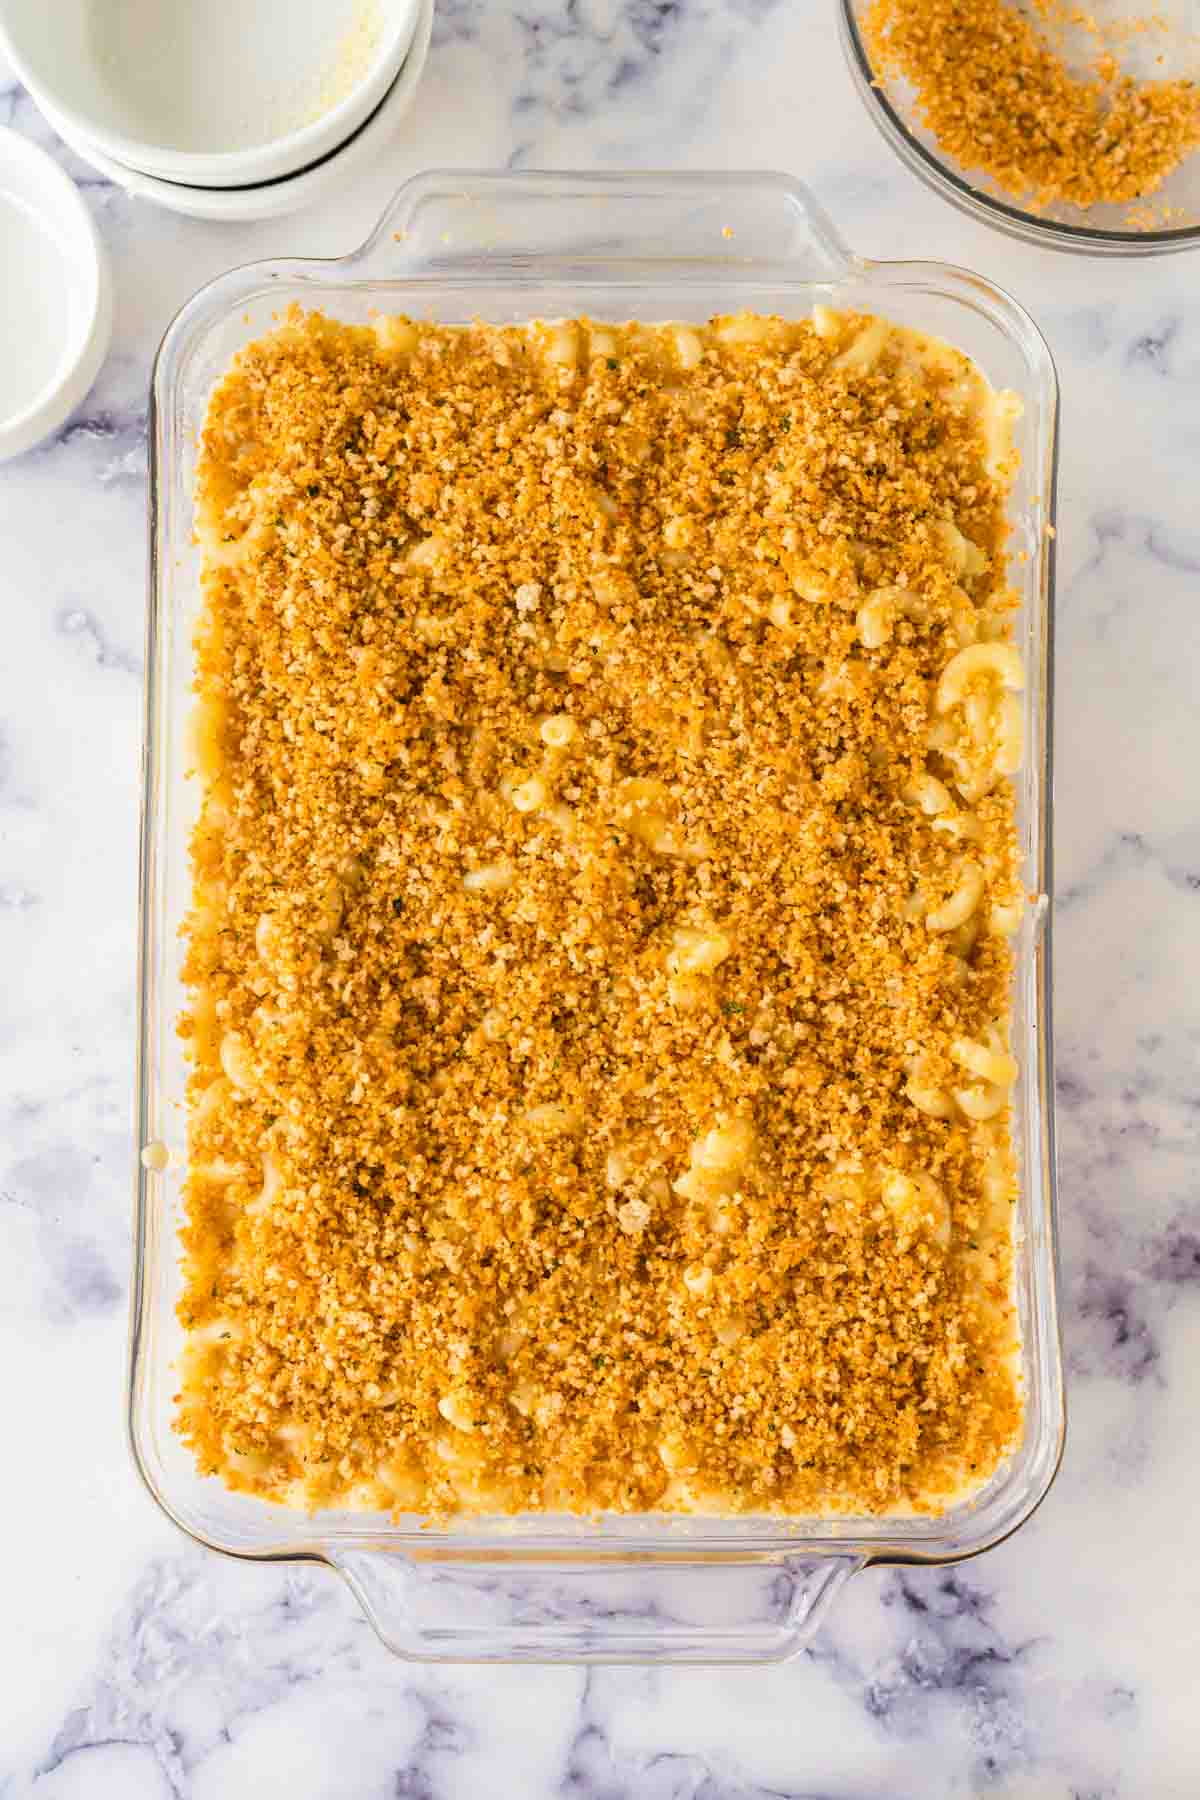 Assembled baked mac n cheese in a 9x13 dish.